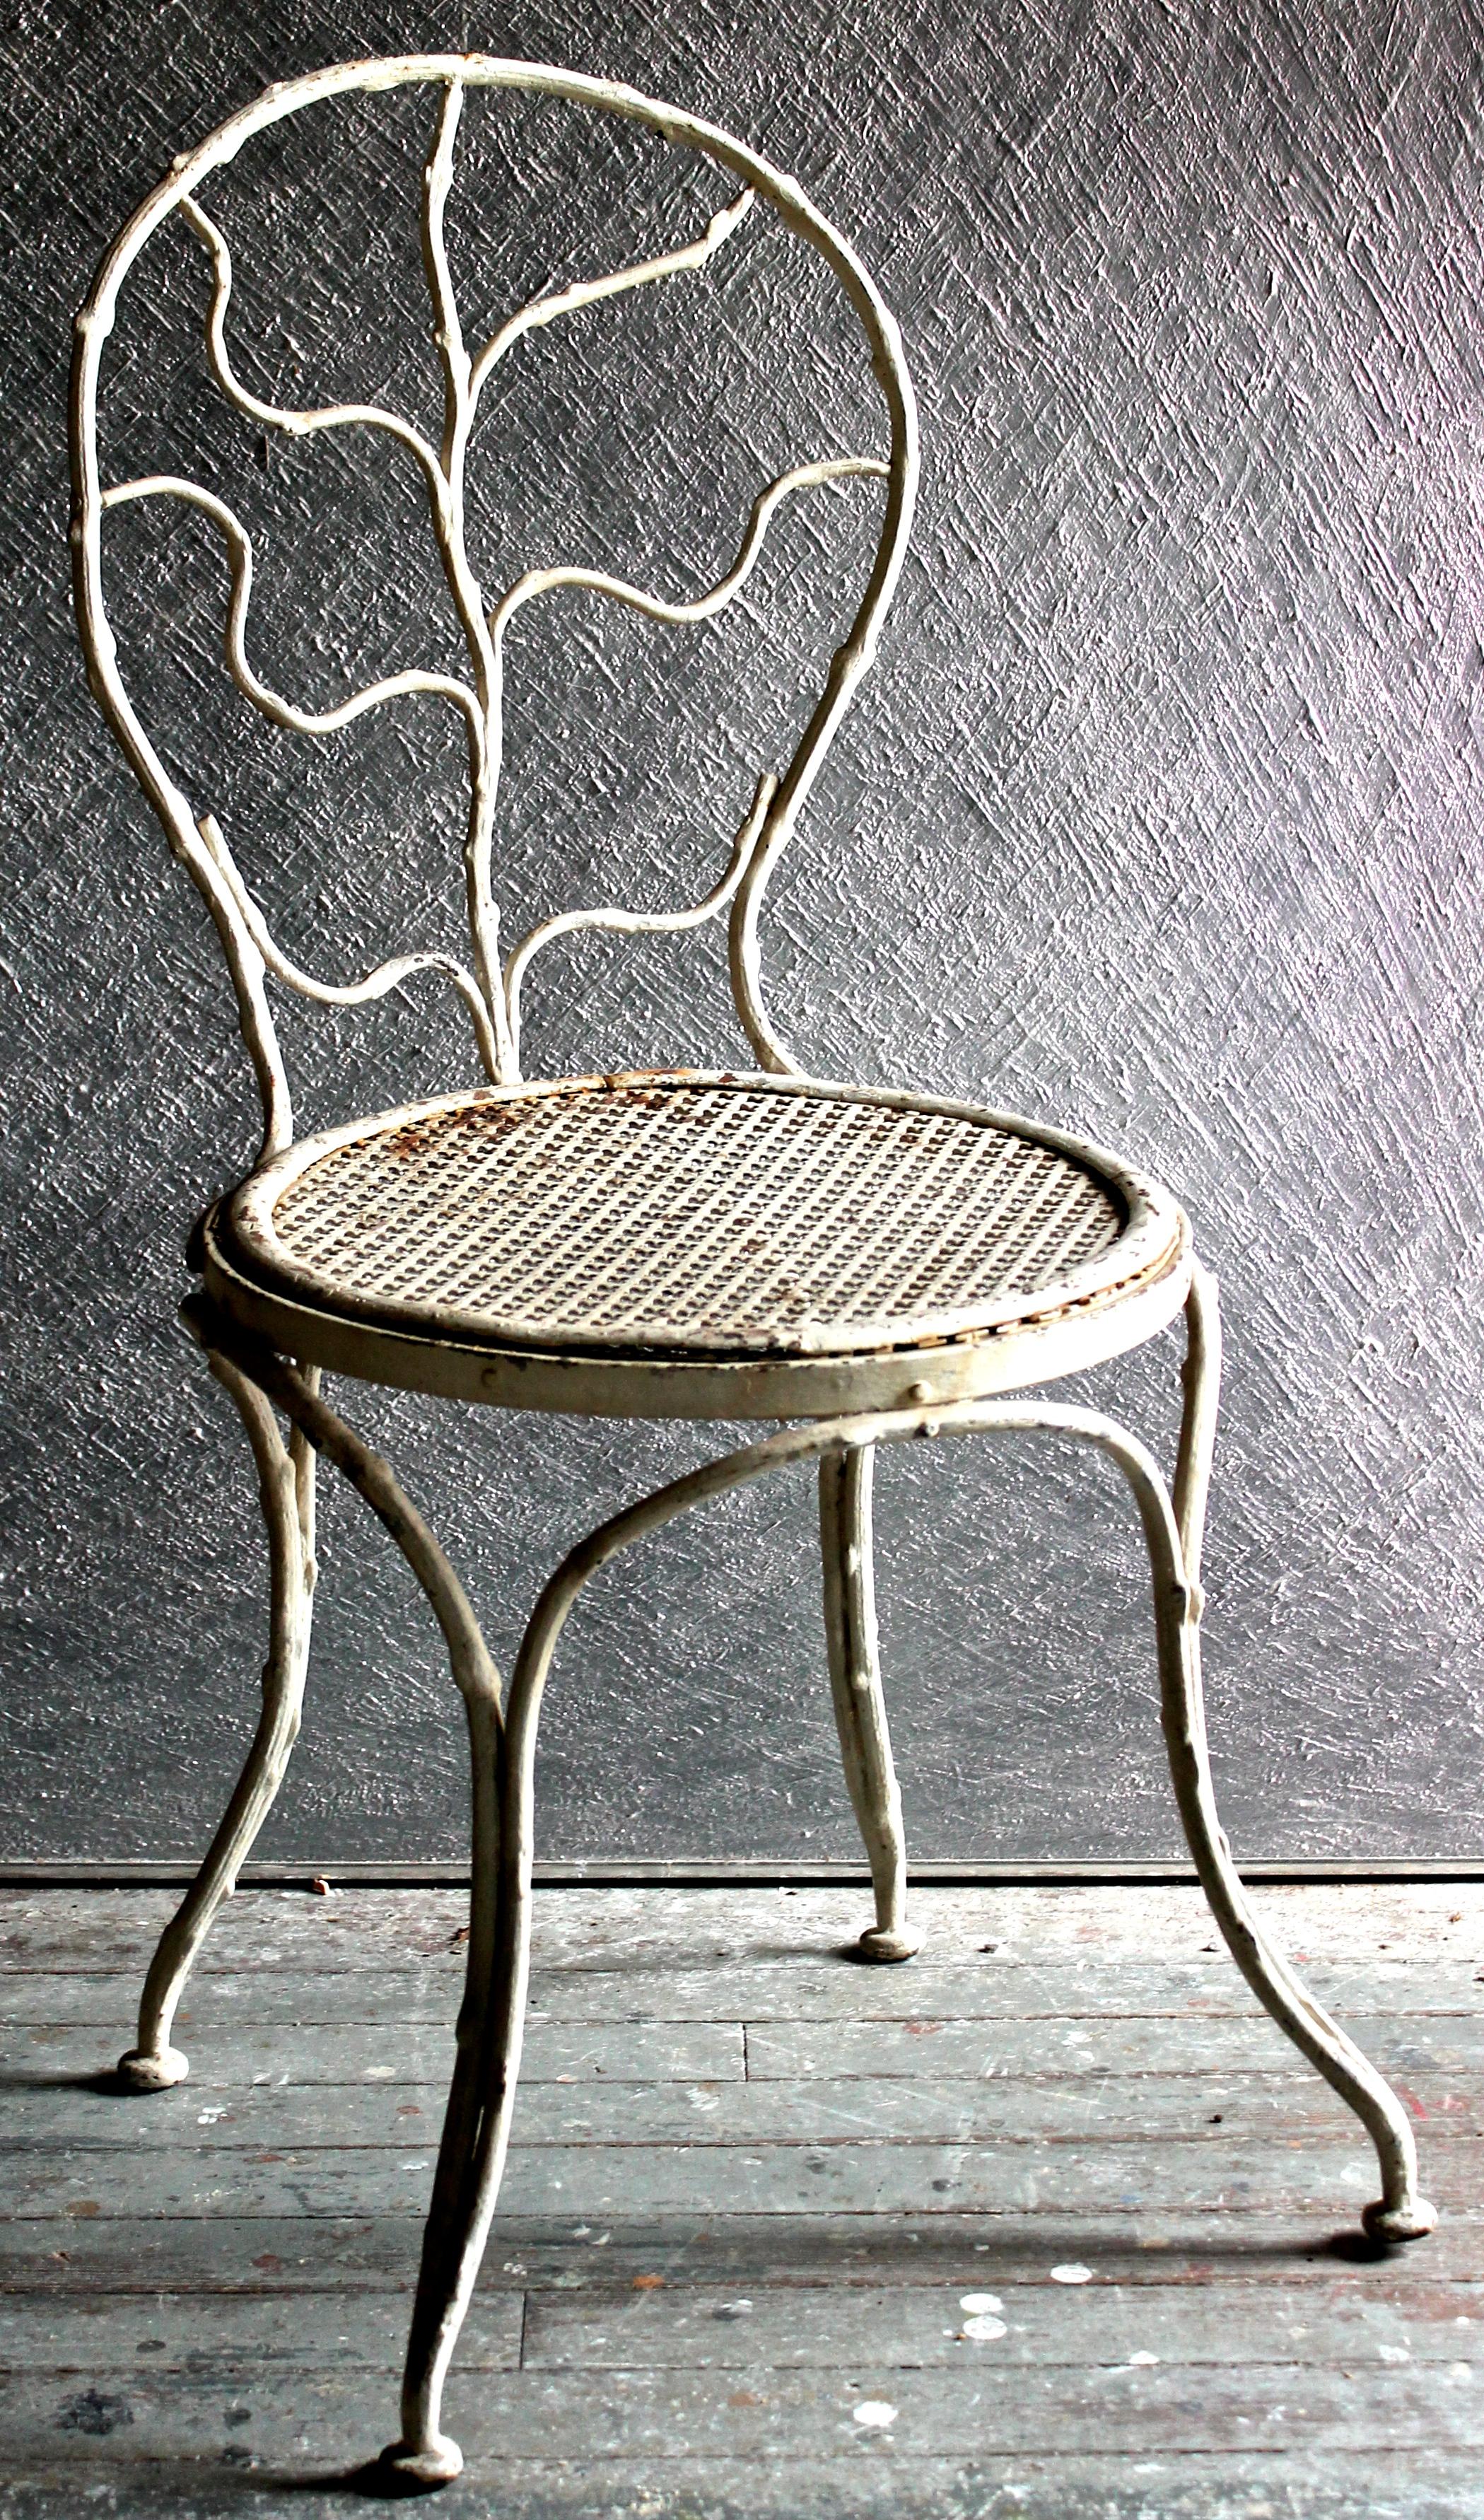 Garden chairs in forged wrought iron by Durenne Foundries. This model from the late 19th century, taken over by Jean-Michel Frank. Bibliography: F. Baudet, 'JM Frank, Memoire du Style Collection', Paris 1998 p.23. Catalog of the estate of Madame